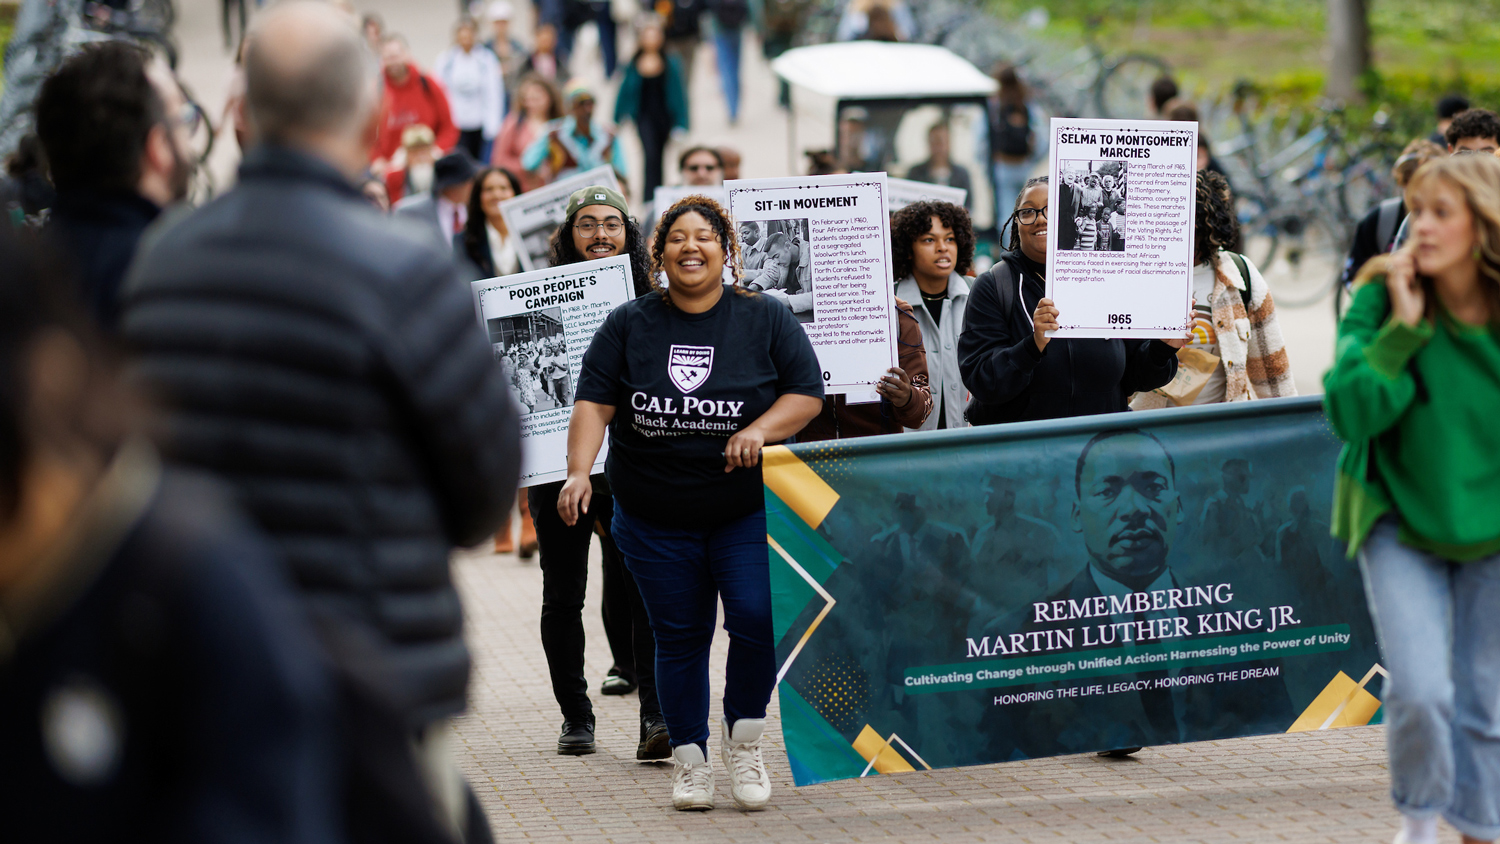 People march behind a green banner featuring a picture of Martin Luther King, Jr., holding signs depicting milestones in the Civil Rights Movement.